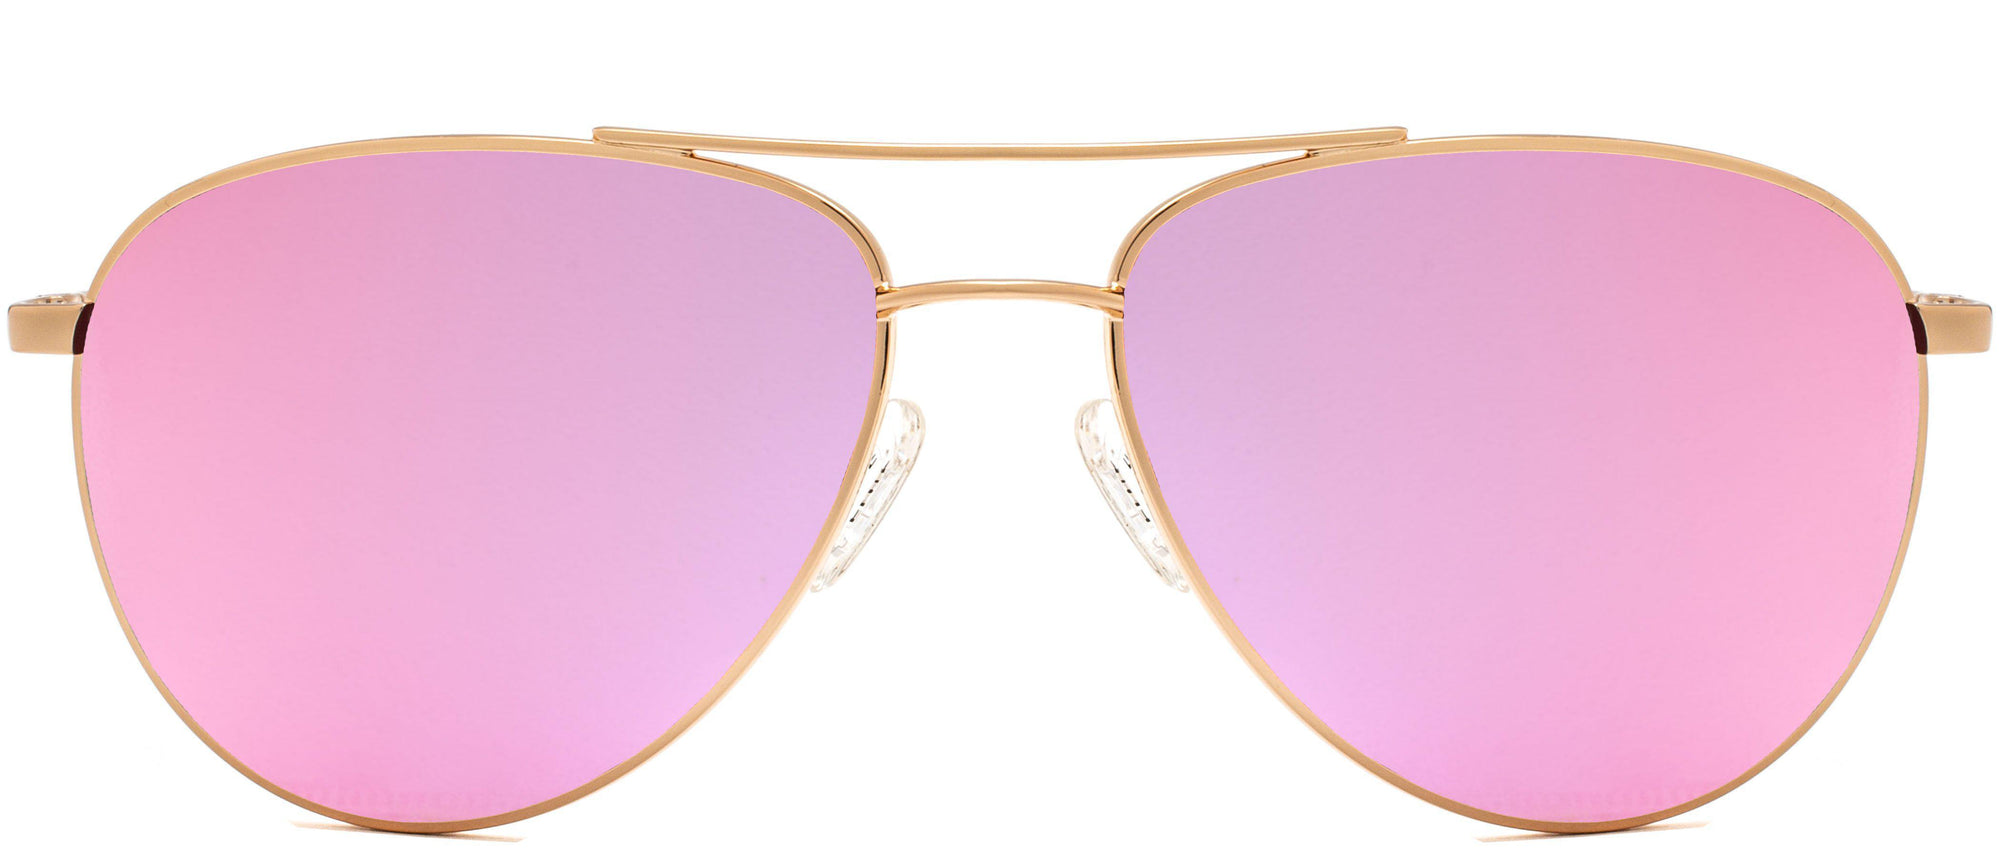 Copley Polarized - Sunglasses NYS Collection Eyewear Rose Gold/Pink